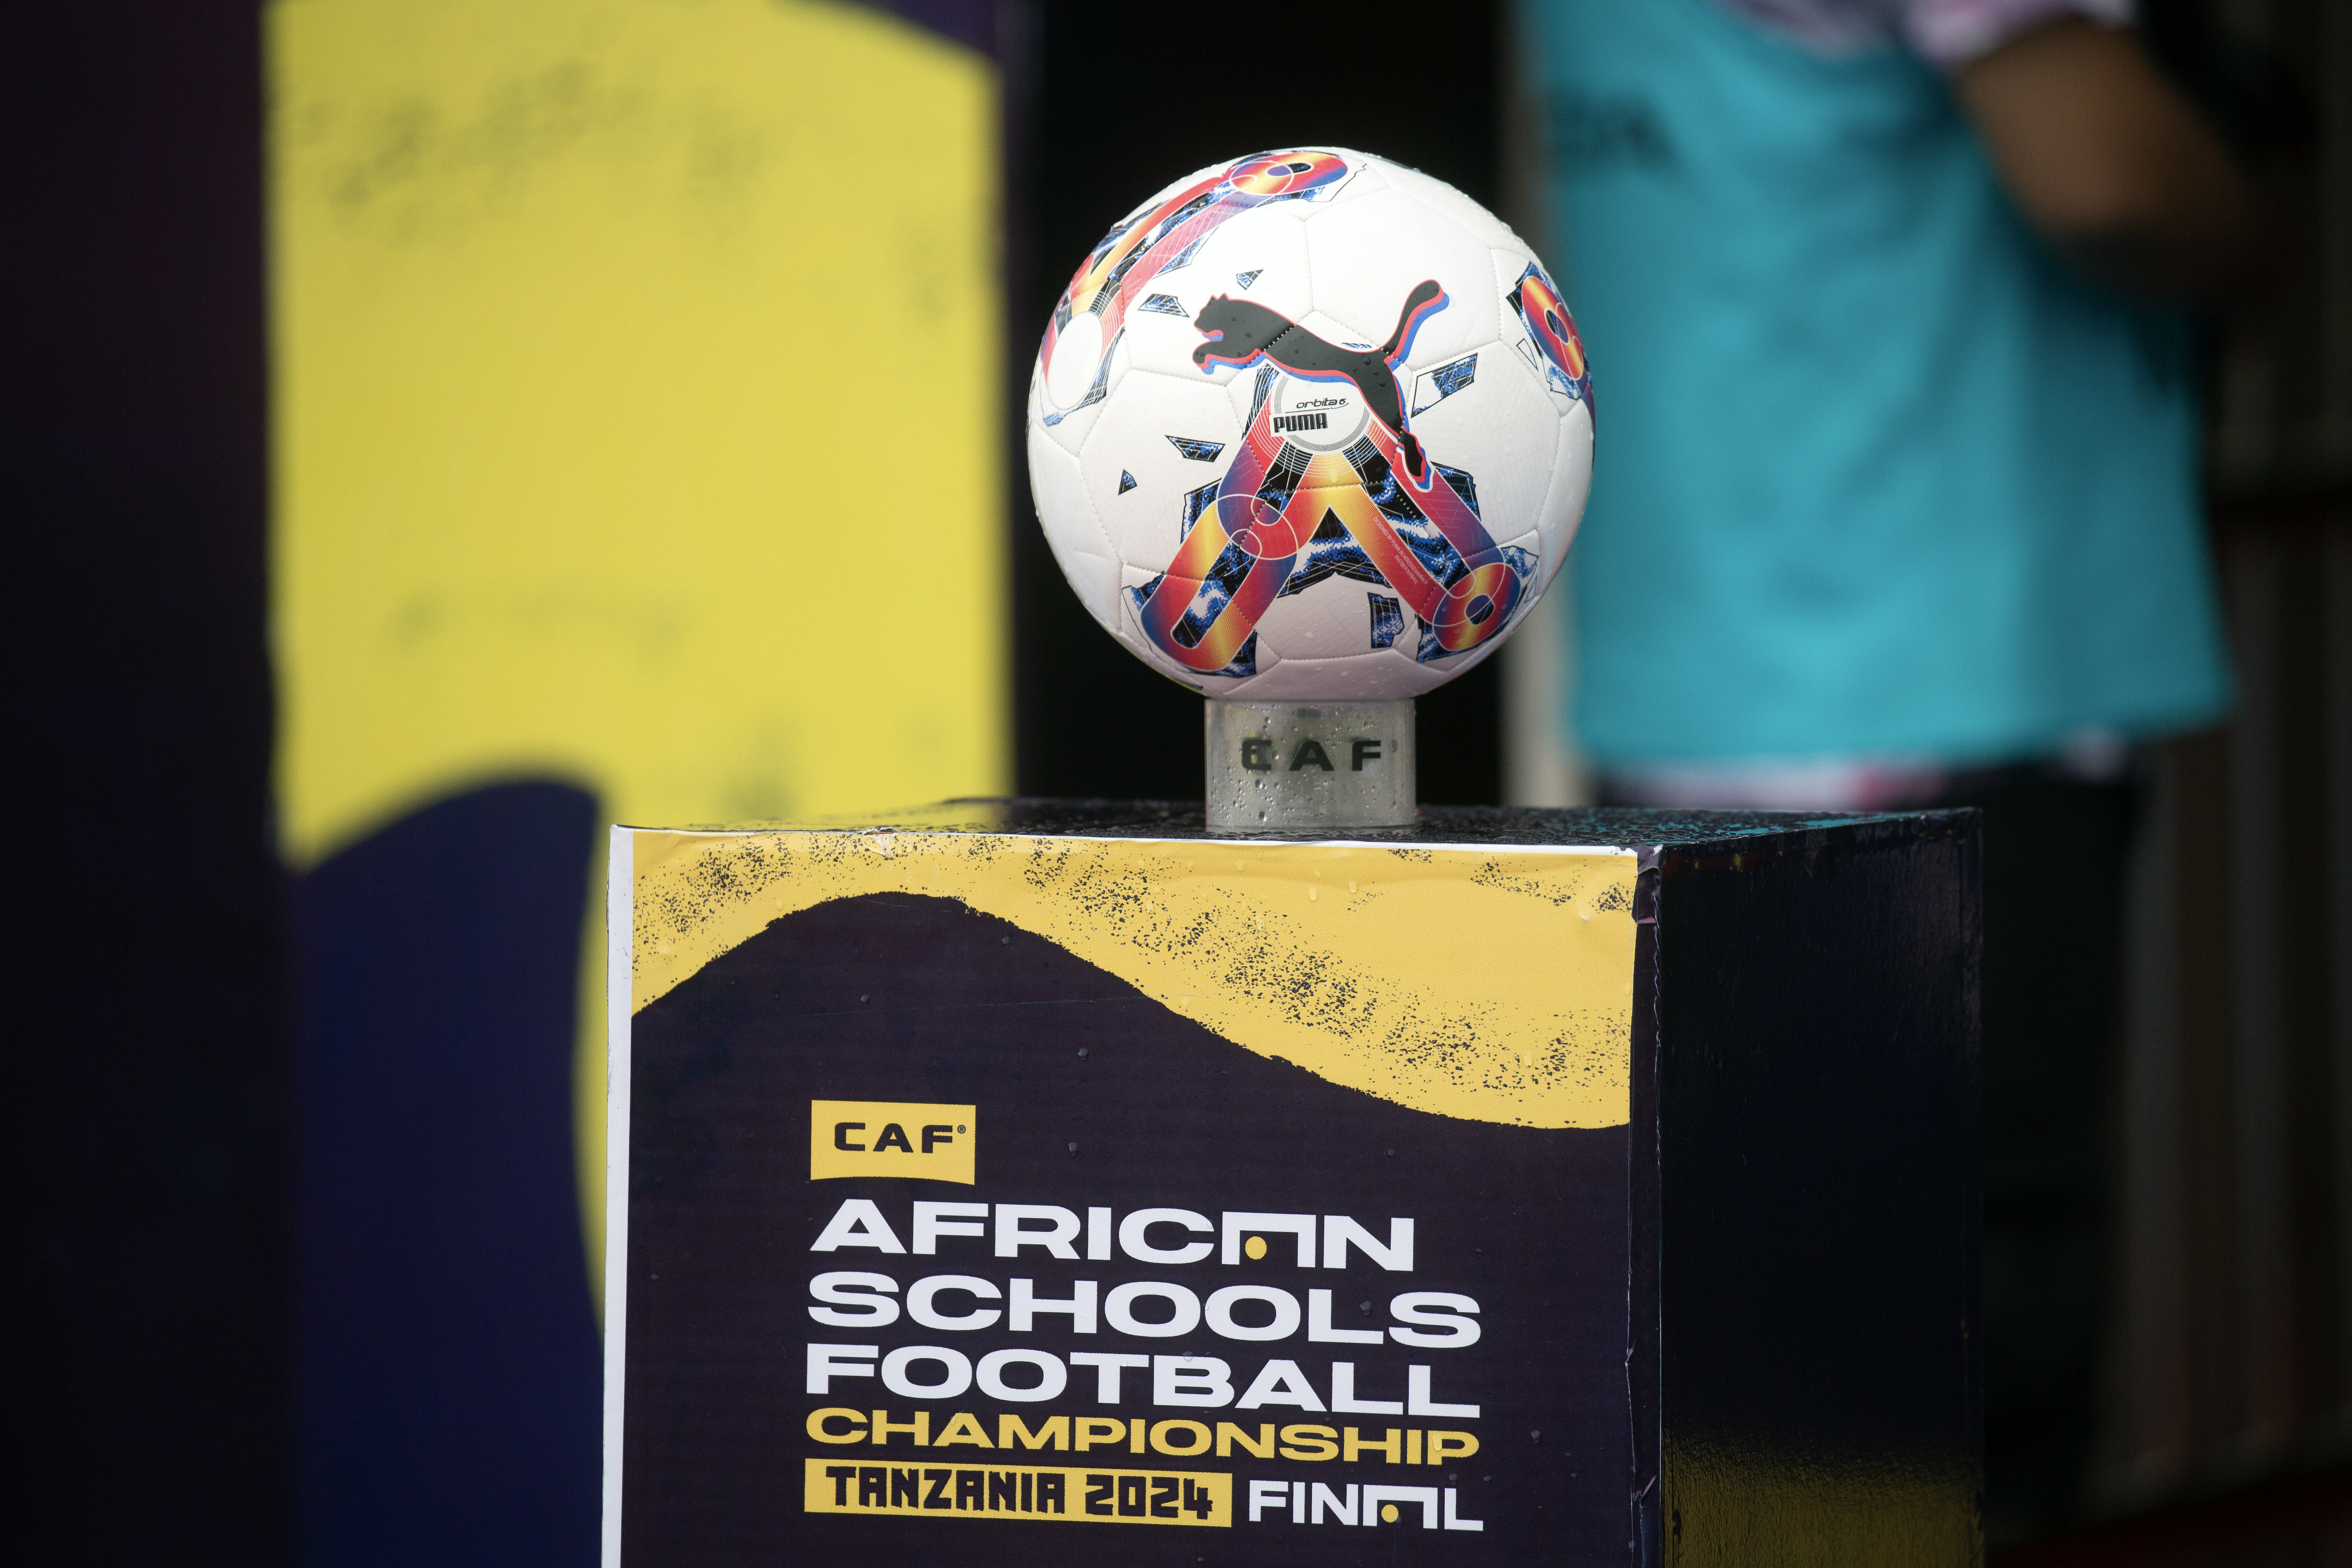 CAF African Schools Football Championship Registration window officially open